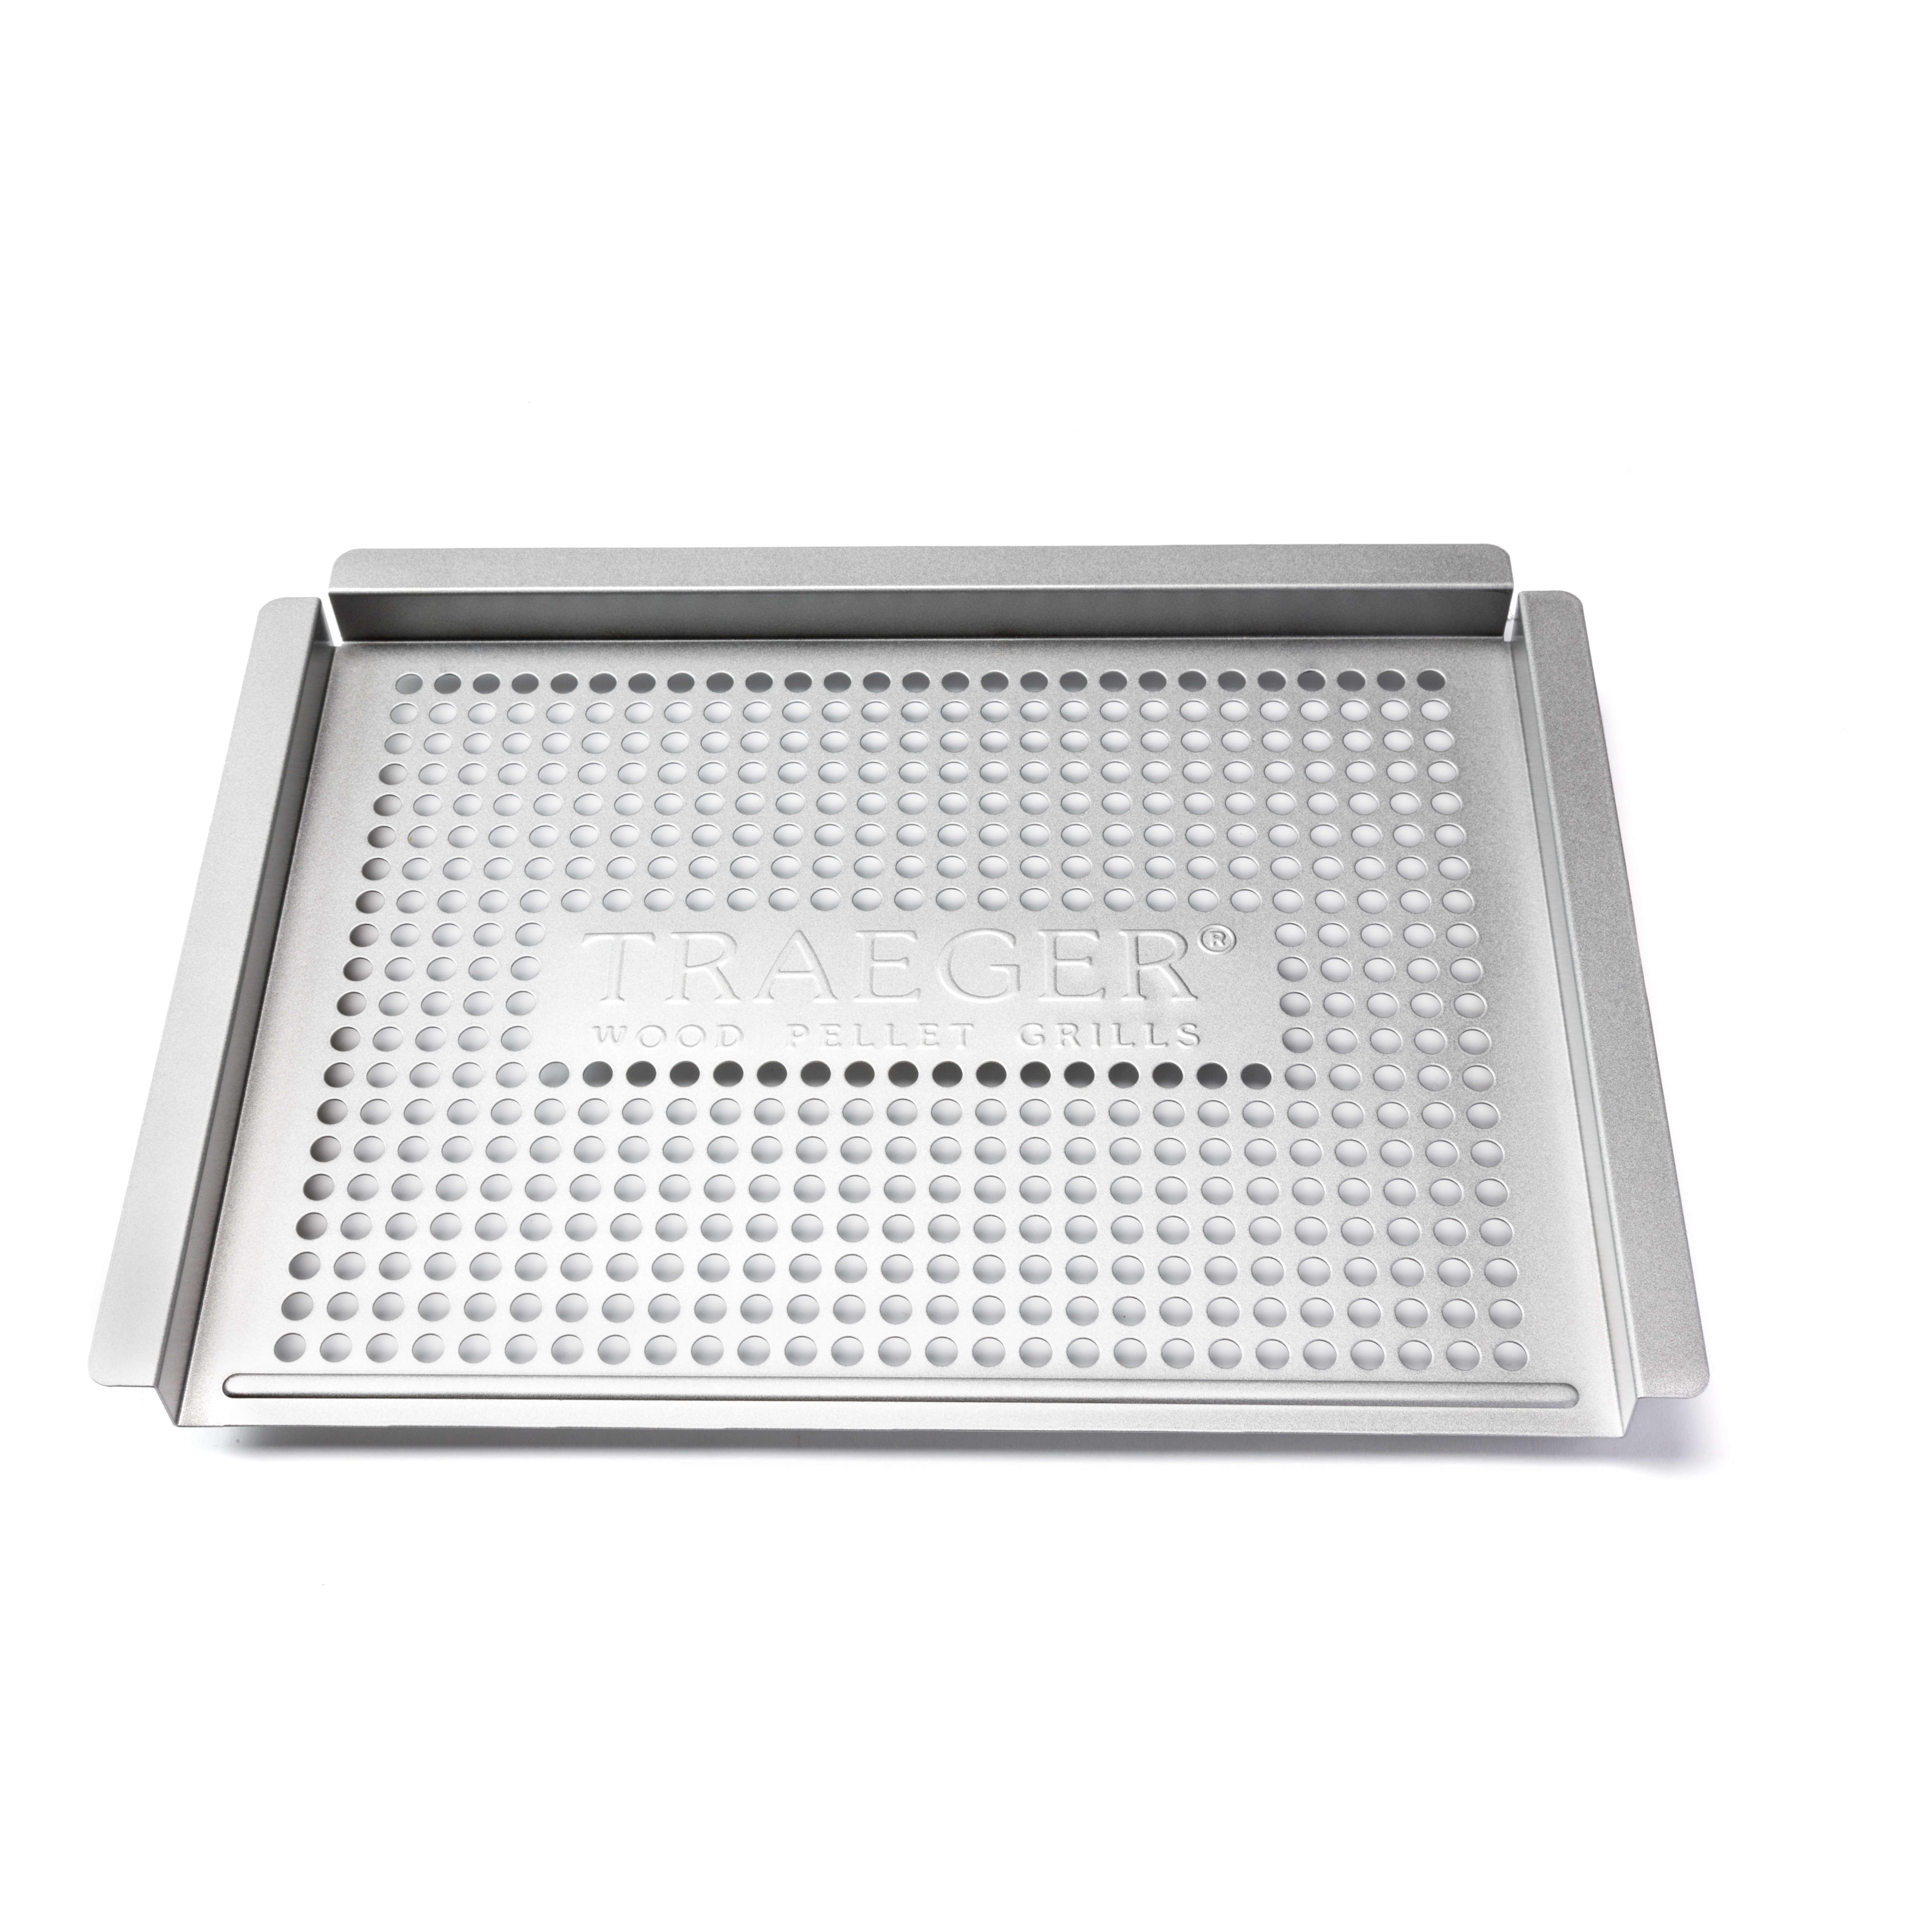 Traeger Grills® Stainless Steel Grill Basket